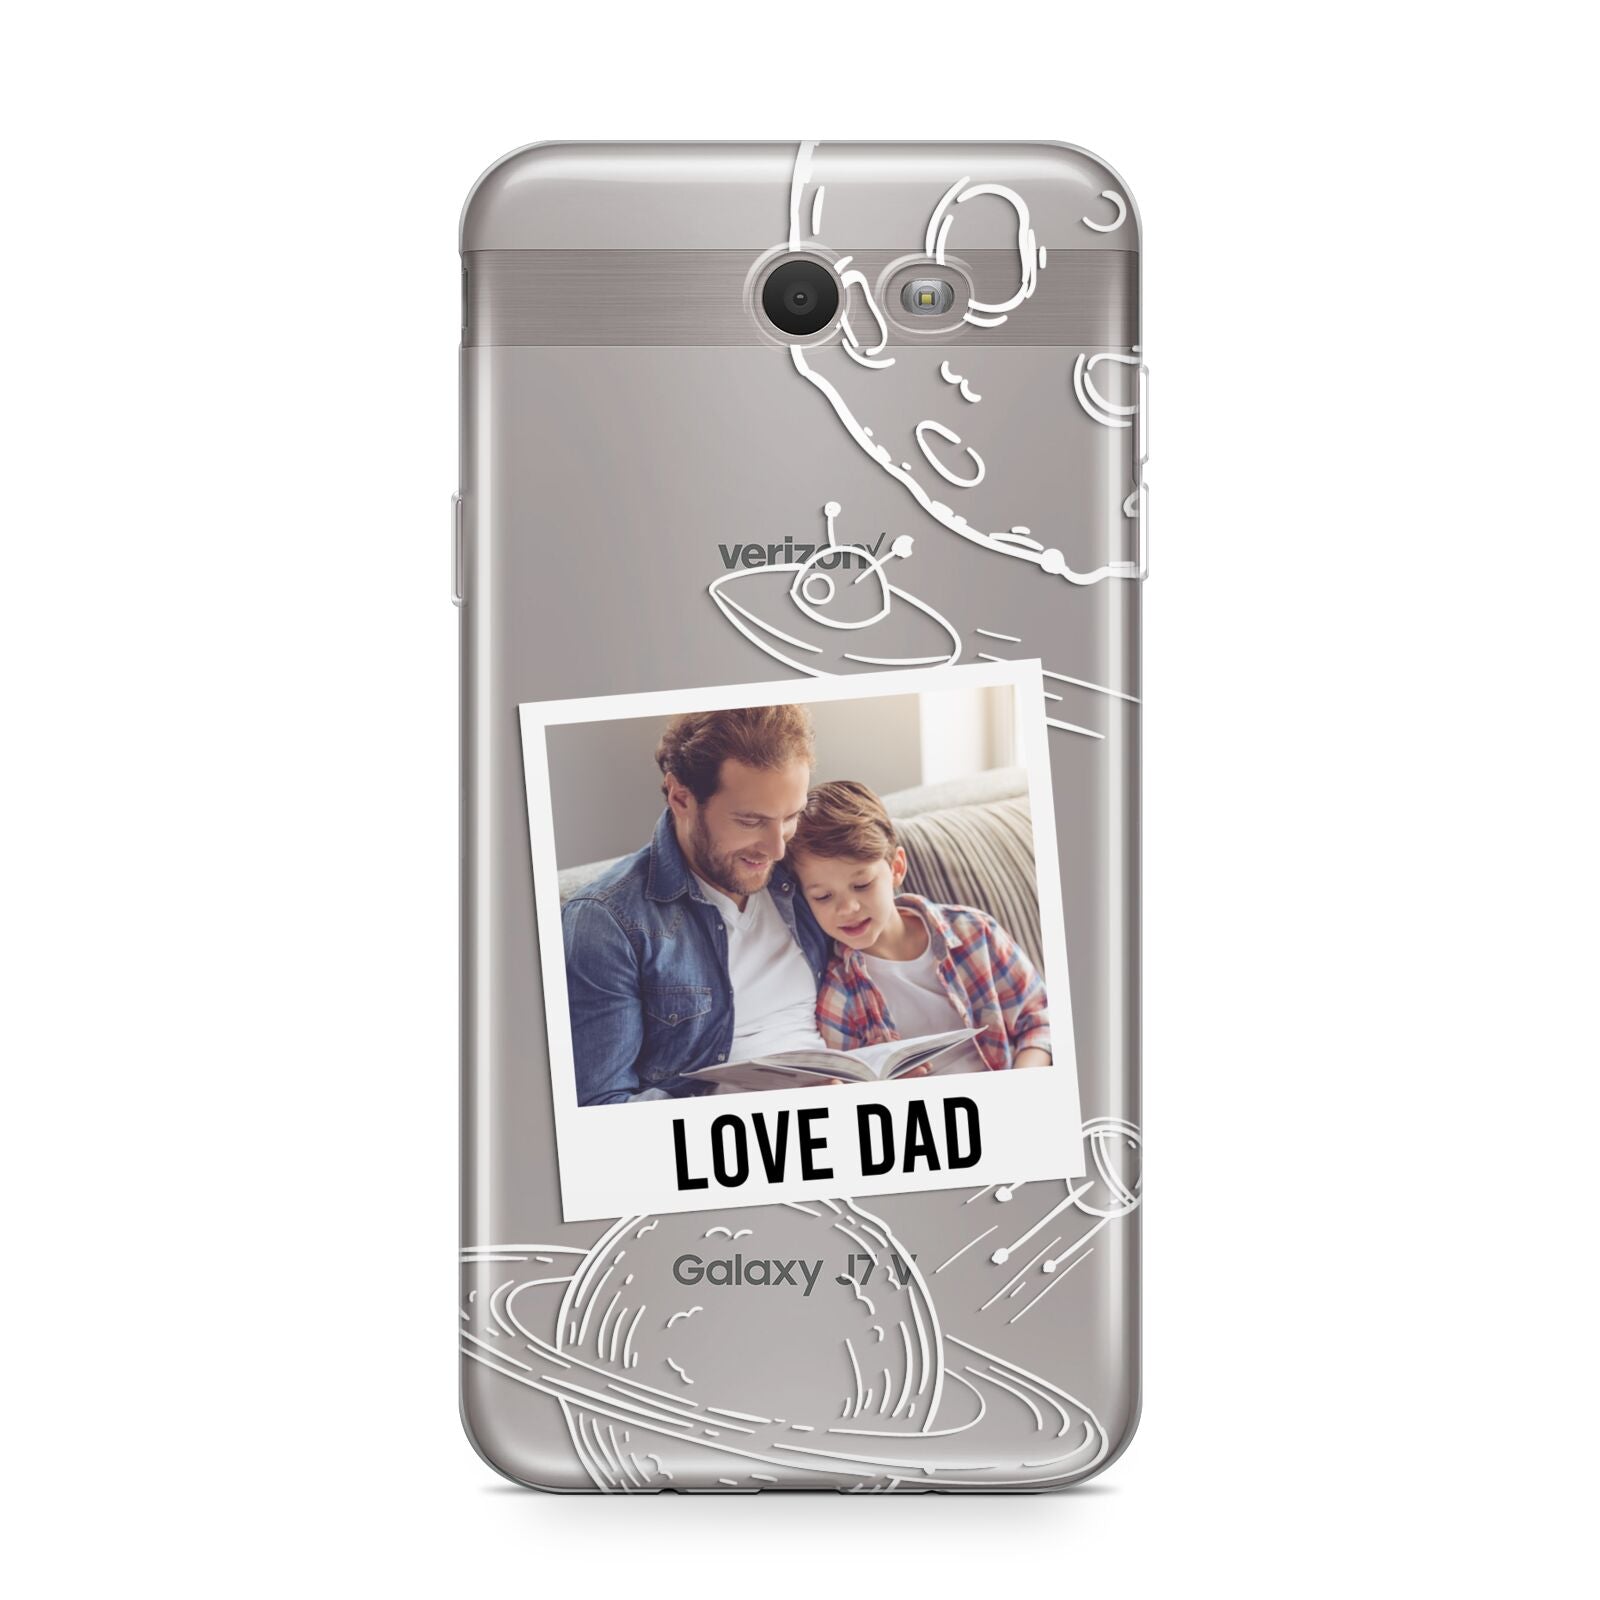 Personalised From Dad Photo Samsung Galaxy J7 2017 Case